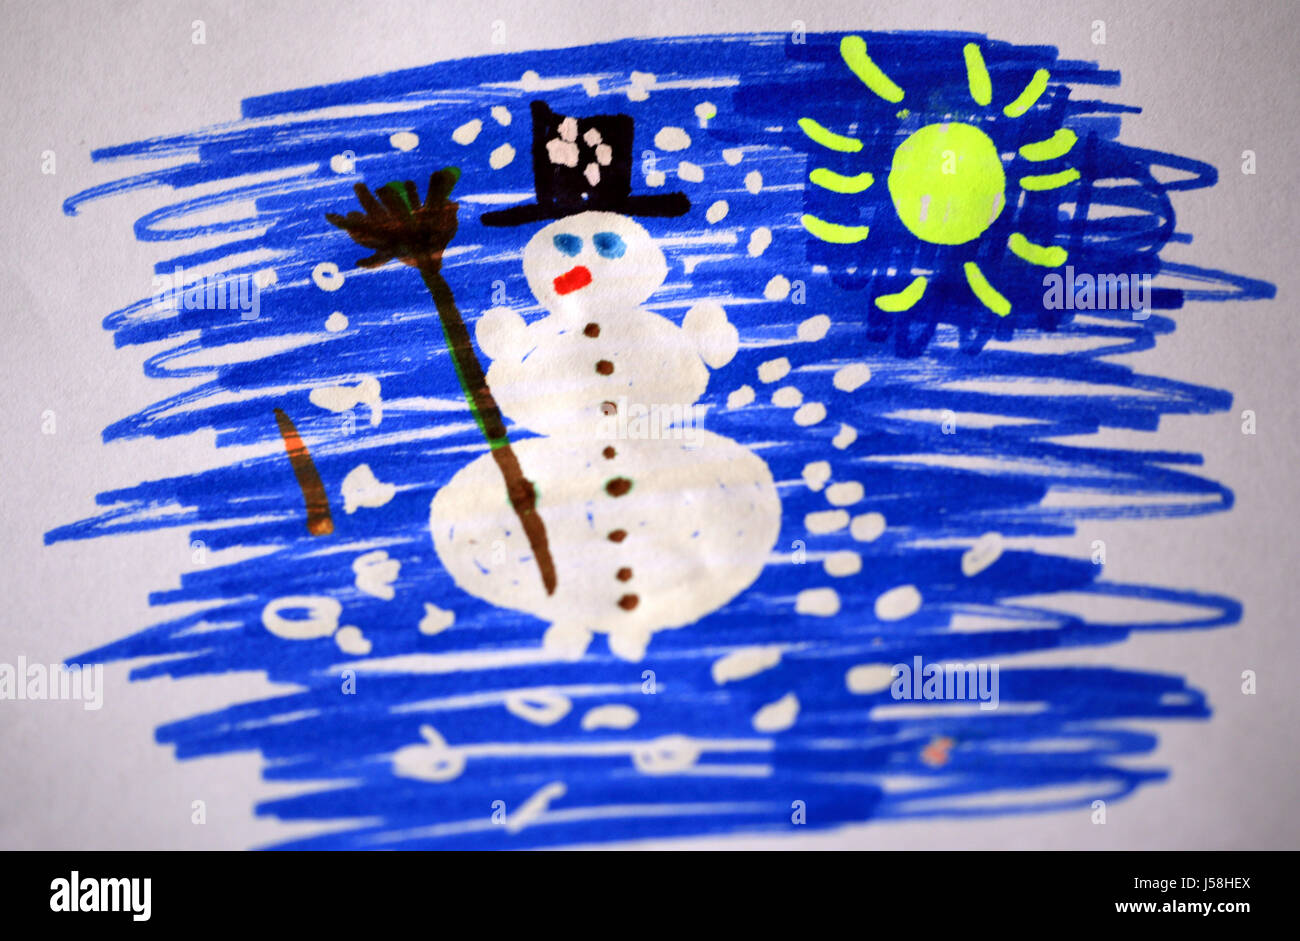 tree winter graphic snowman drawings photo picture image copy deduction snow Stock Photo